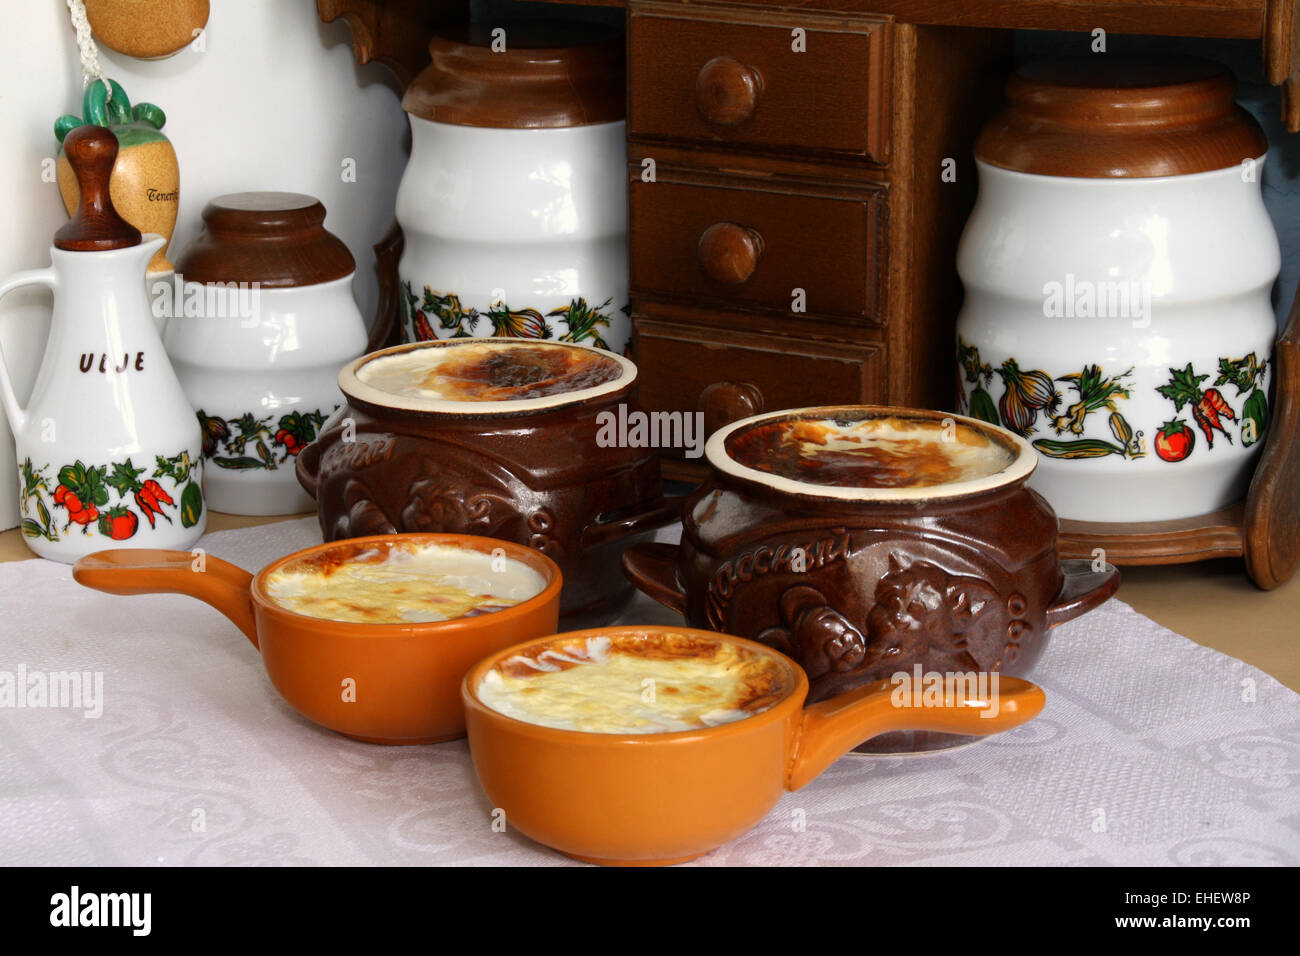 House fermented baked milk in pottery. Stock Photo